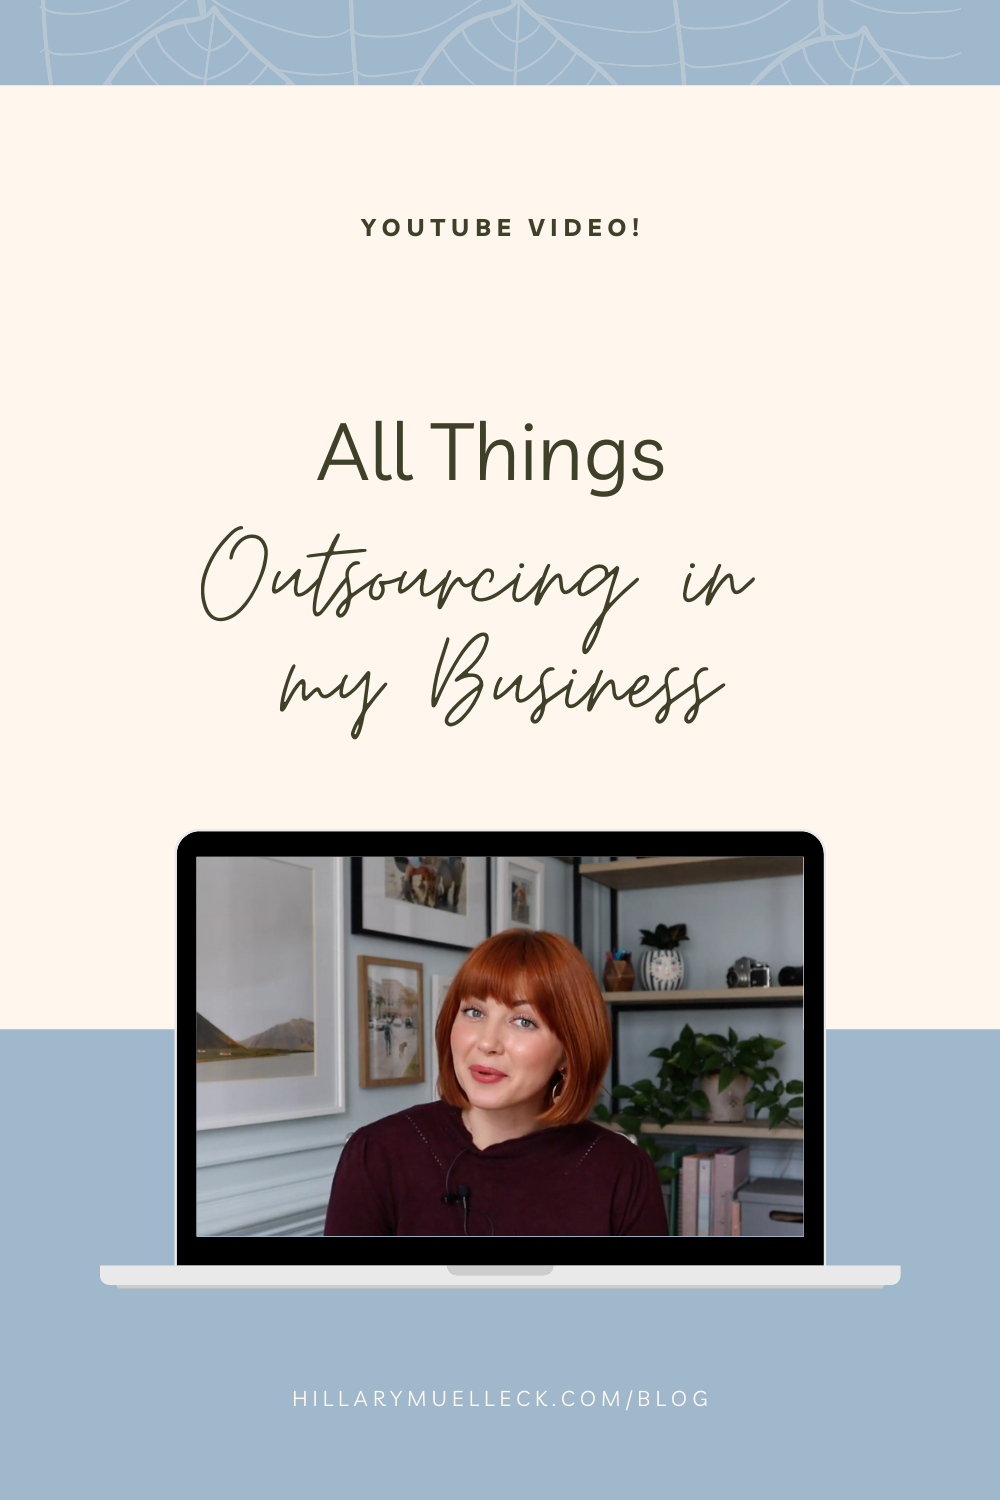 Outsourcing as a wedding photographer: NC wedding photographer Hillary Muelleck shares what tasks she outsources for her business